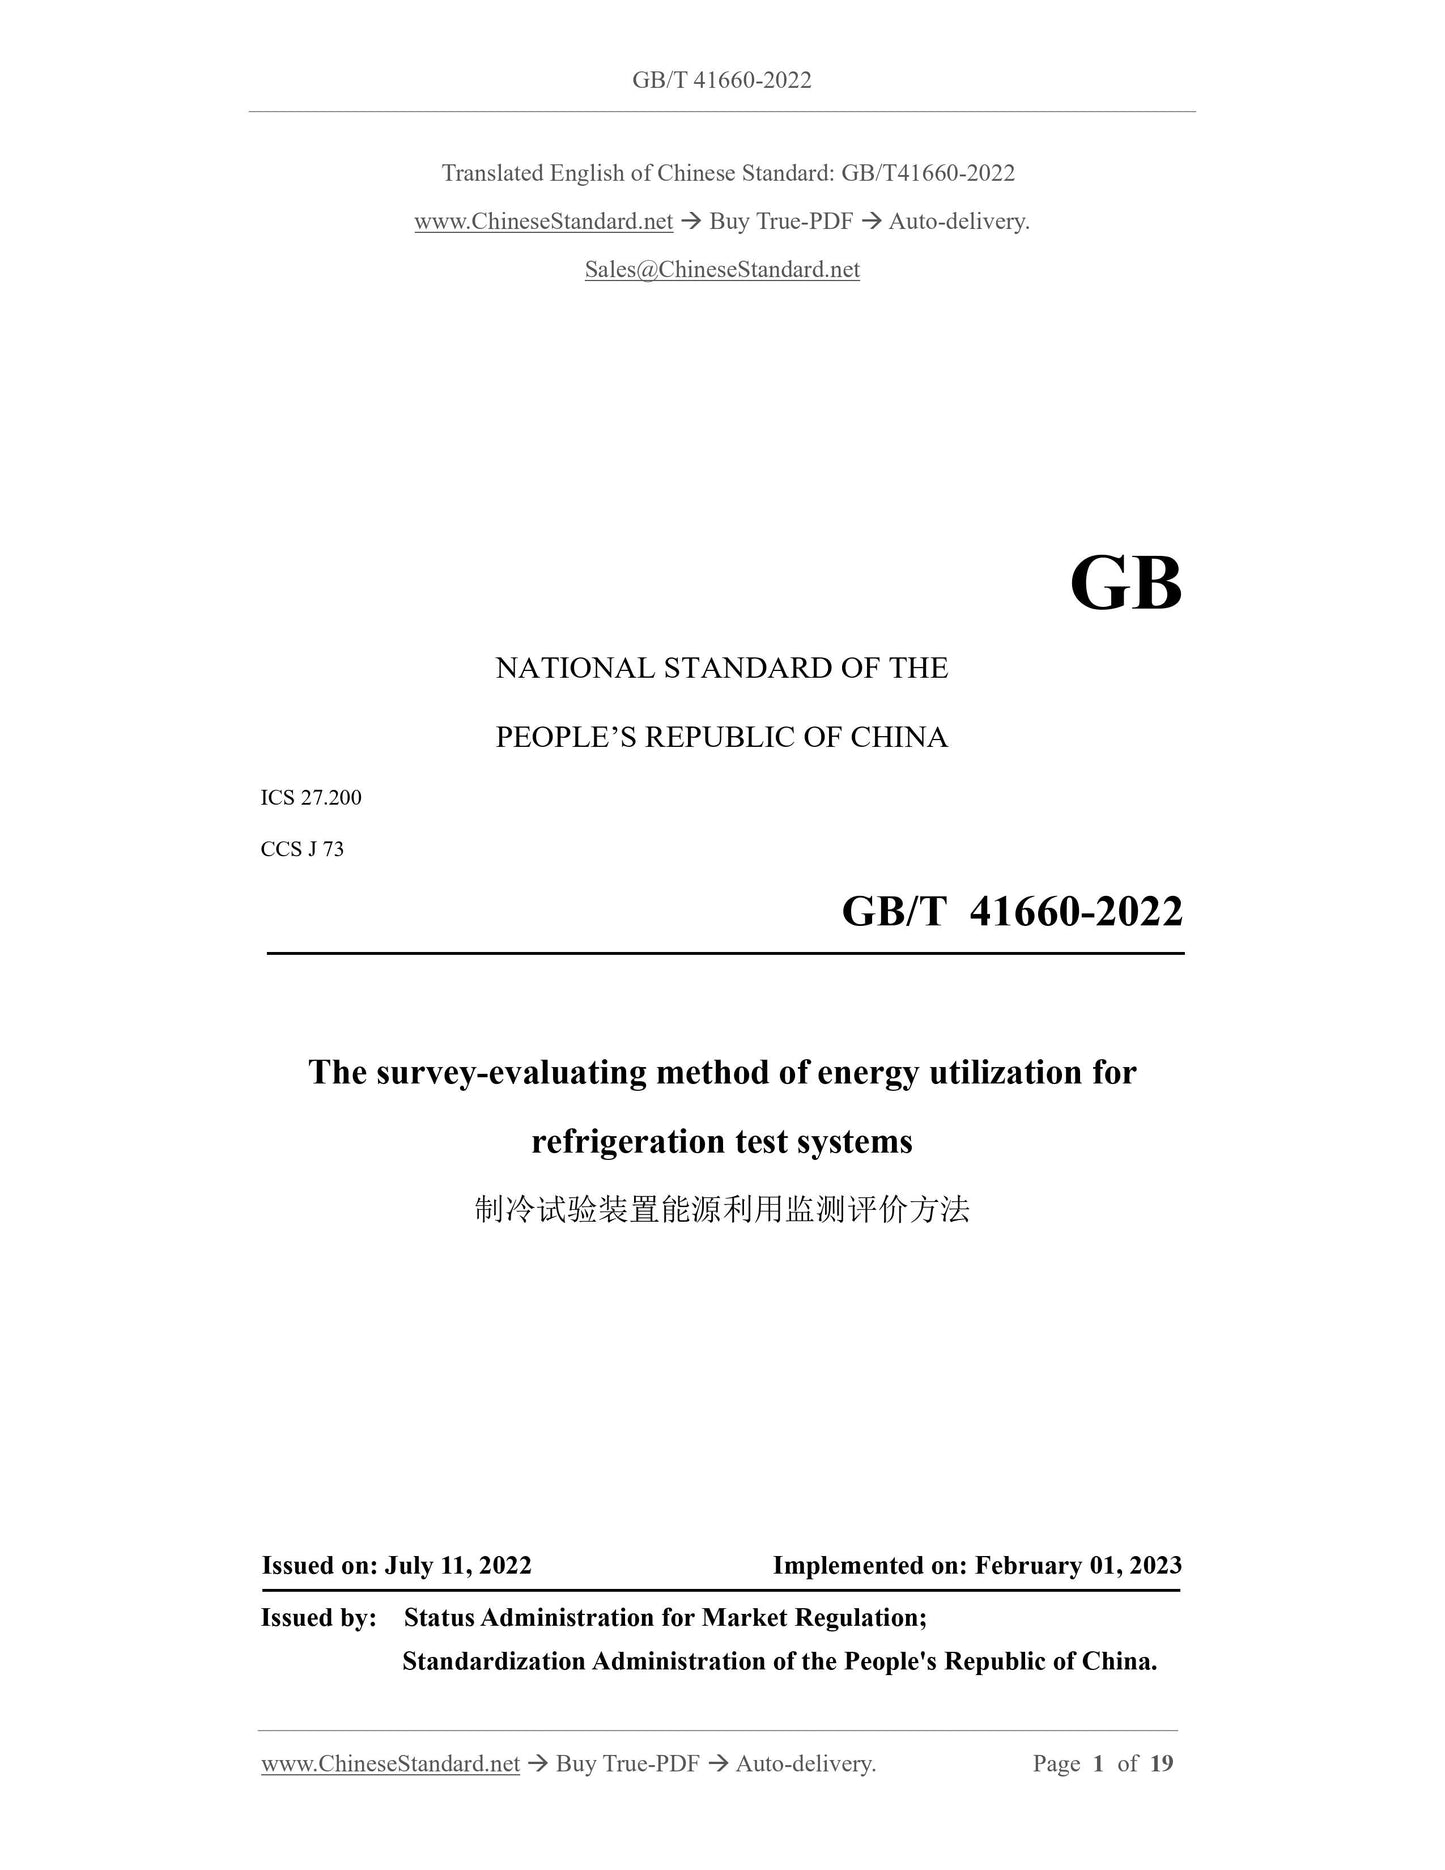 GB/T 41660-2022 Page 1